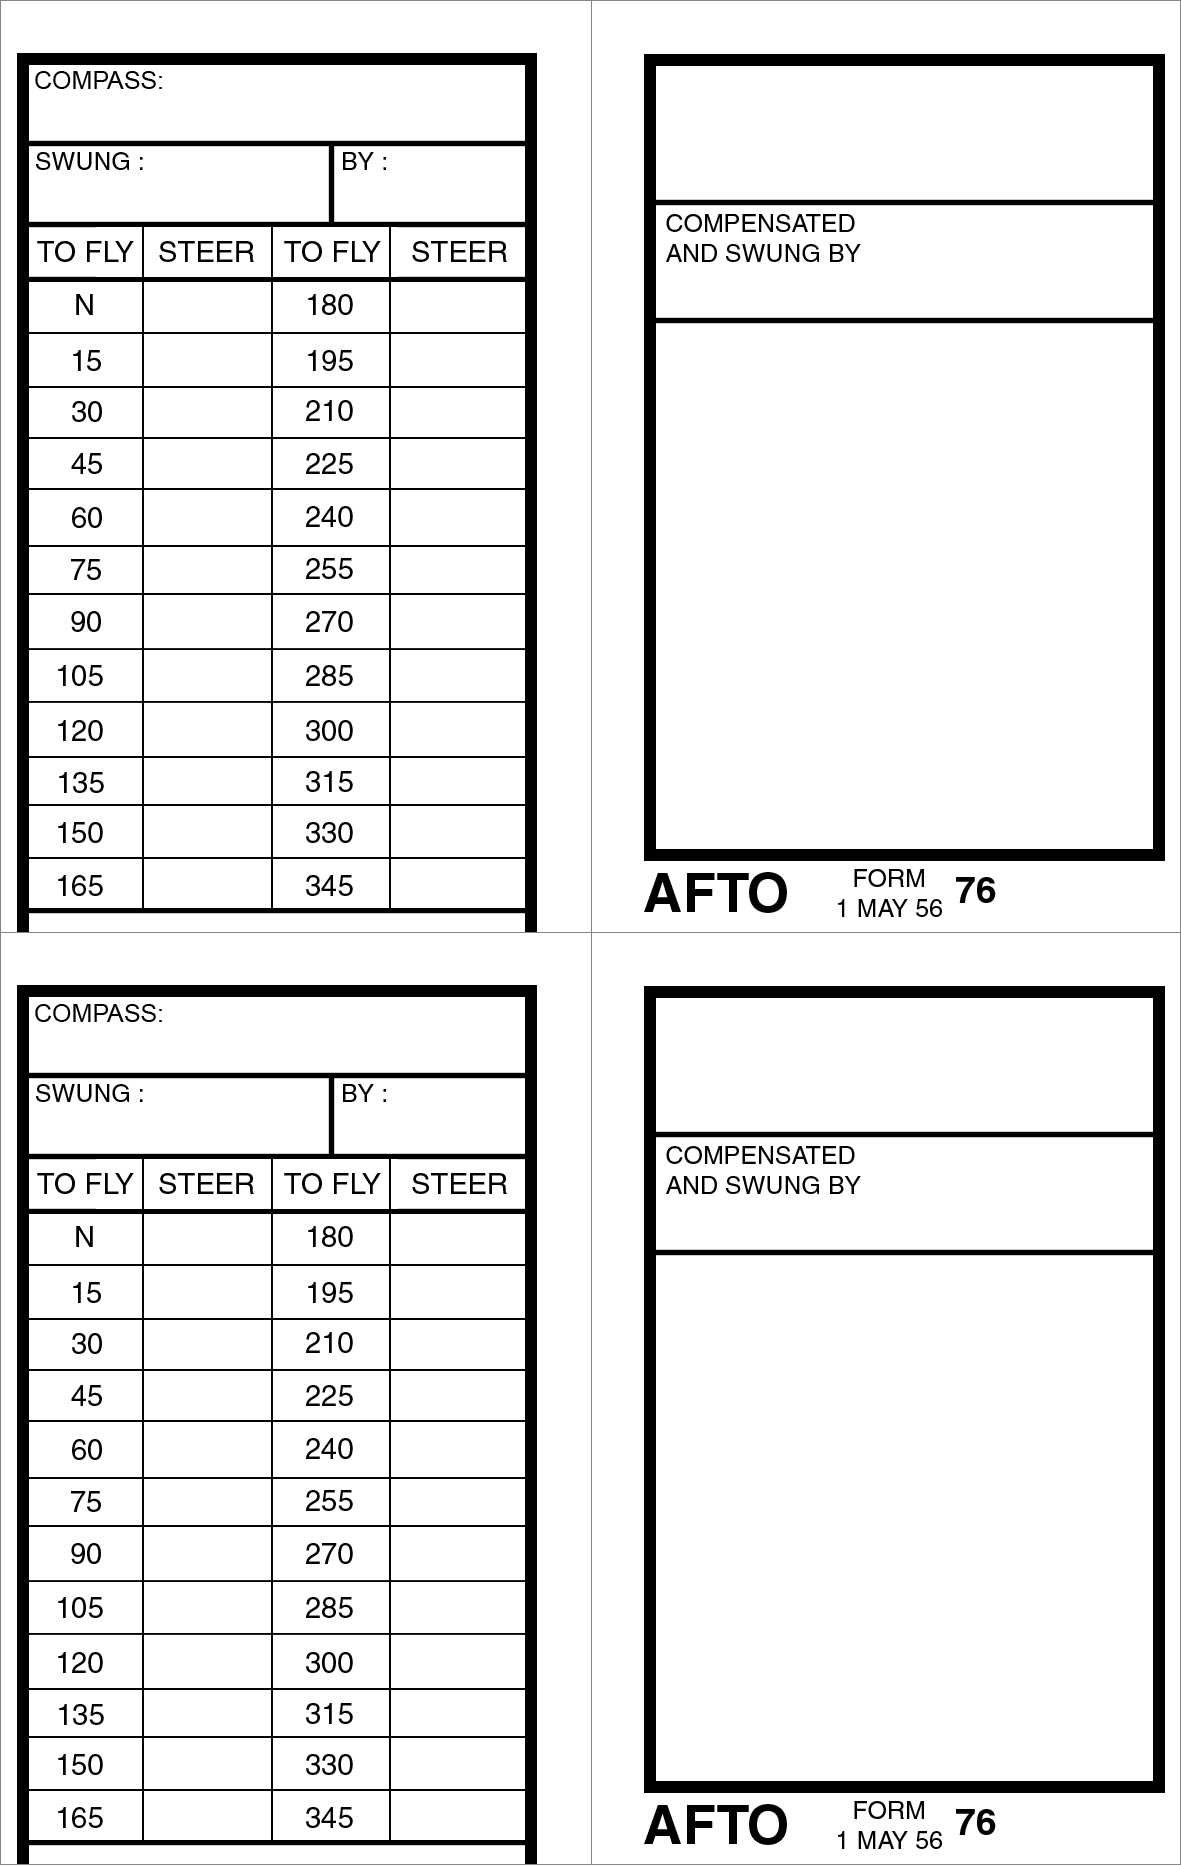 Compass Deviation Card Template ] - Can Be Found At Quot With Compass Deviation Card Template